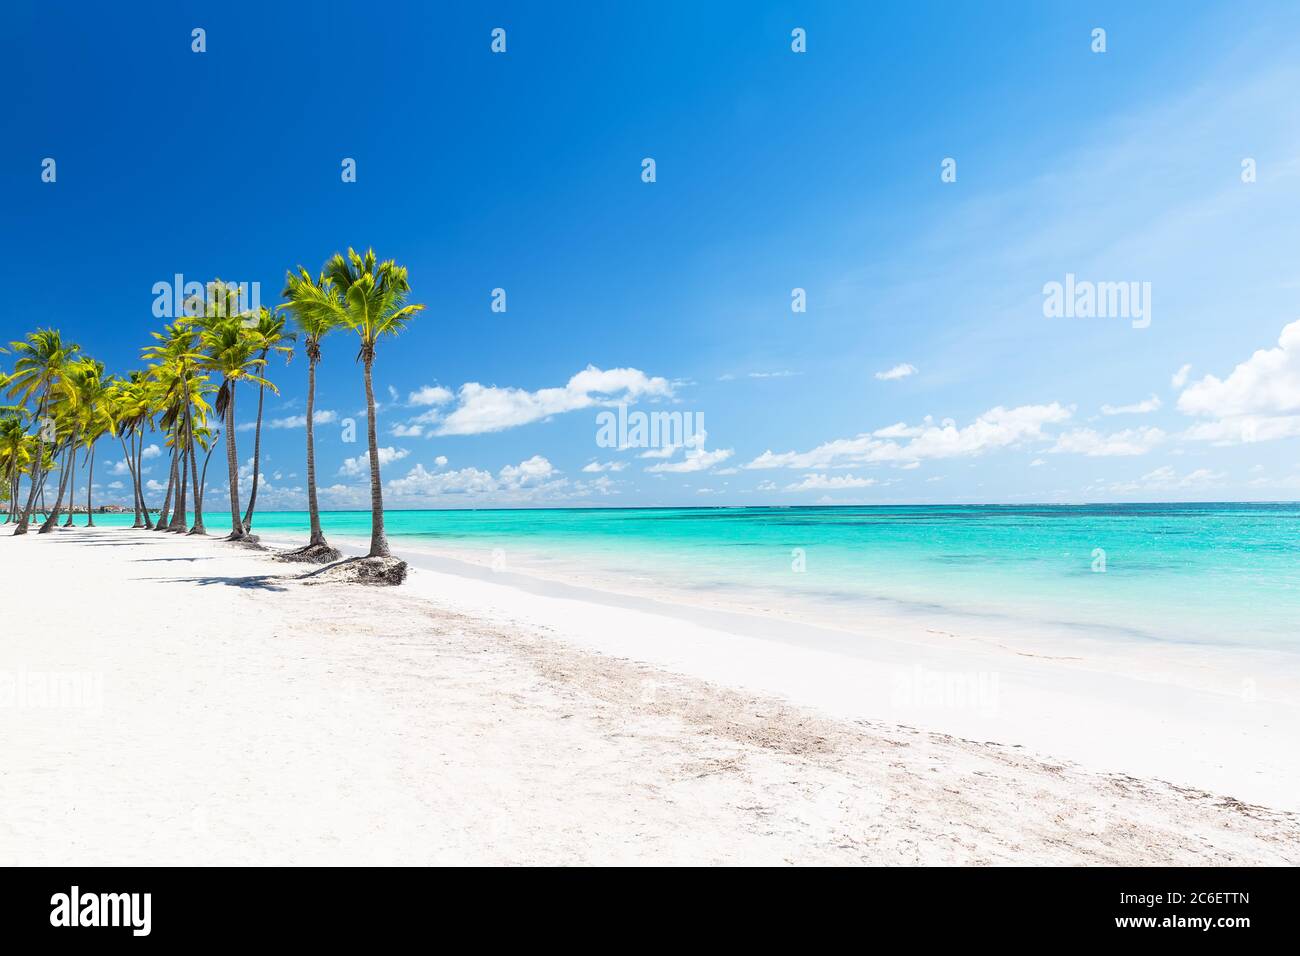 Coconut Palm trees on white sandy beach in Punta Cana, Dominican Republic. Summer holiday concept. Tropical beach background. Stock Photo